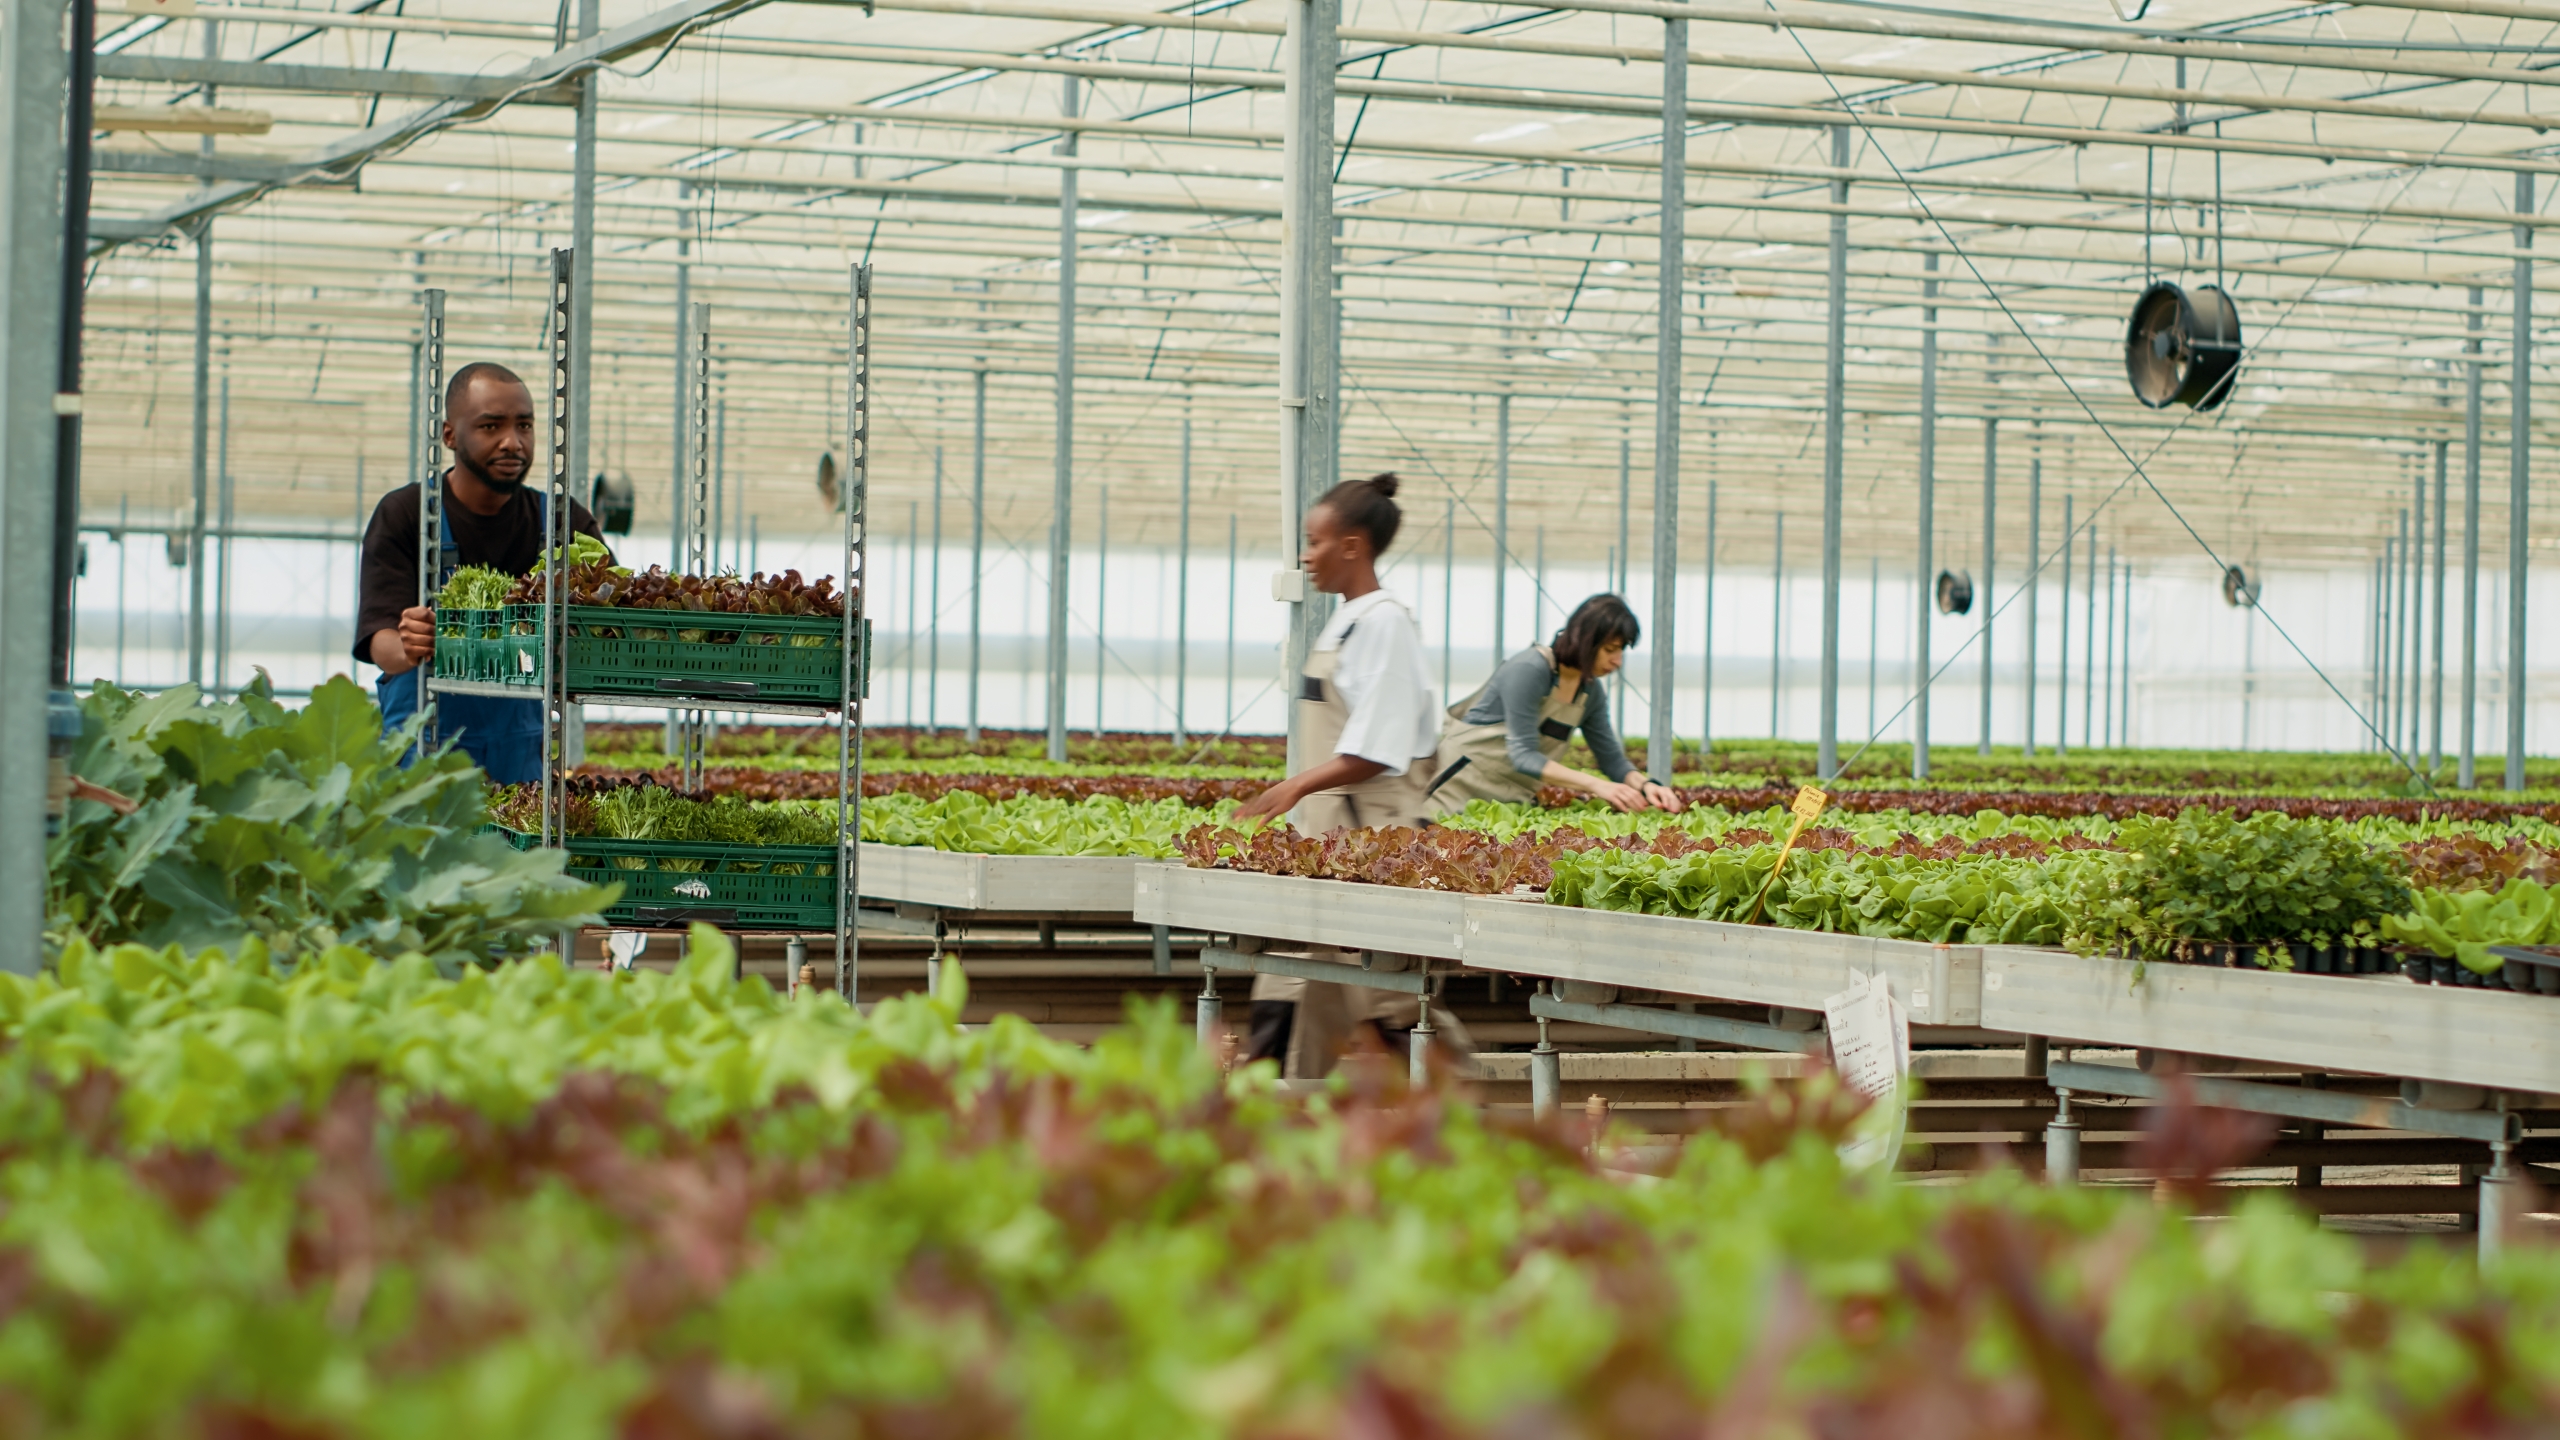 A greenhouse worker is pushing a rack of crates filled with locally grown organic green lettuce sourced sustainably.